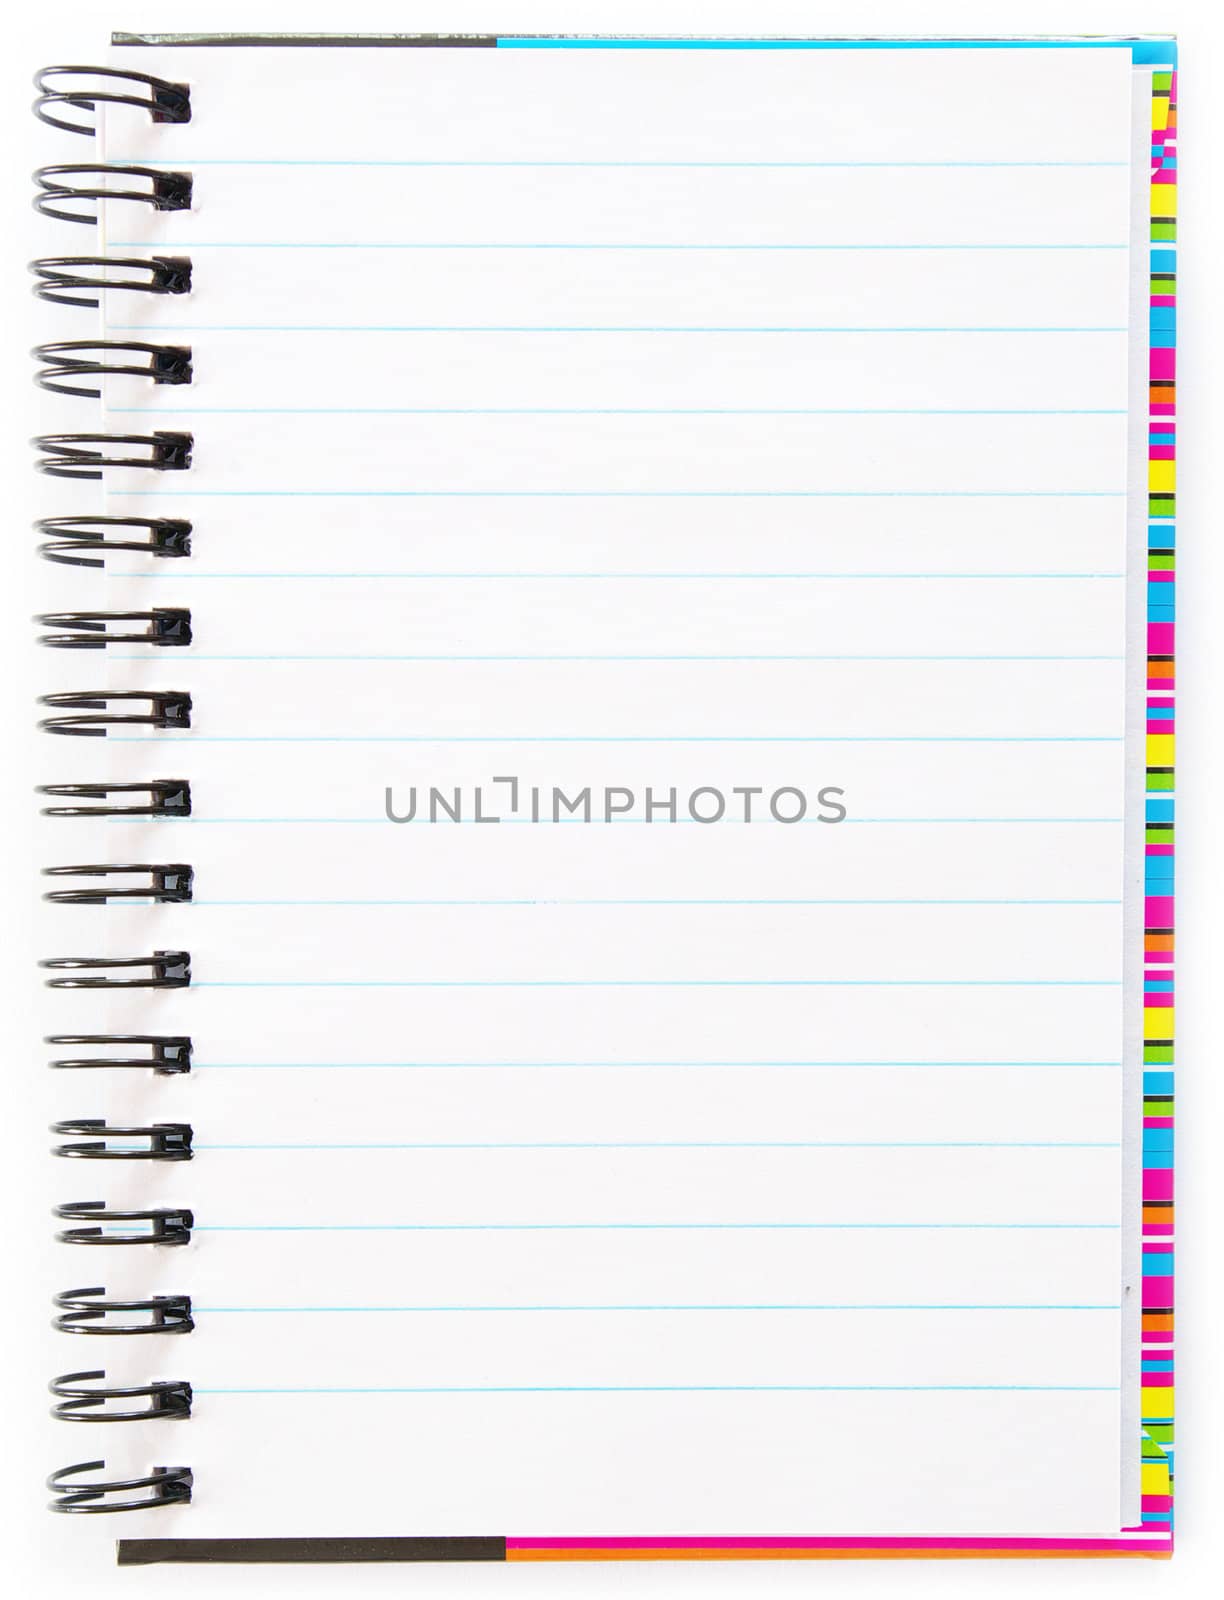 blank spiral notepad isolated on white